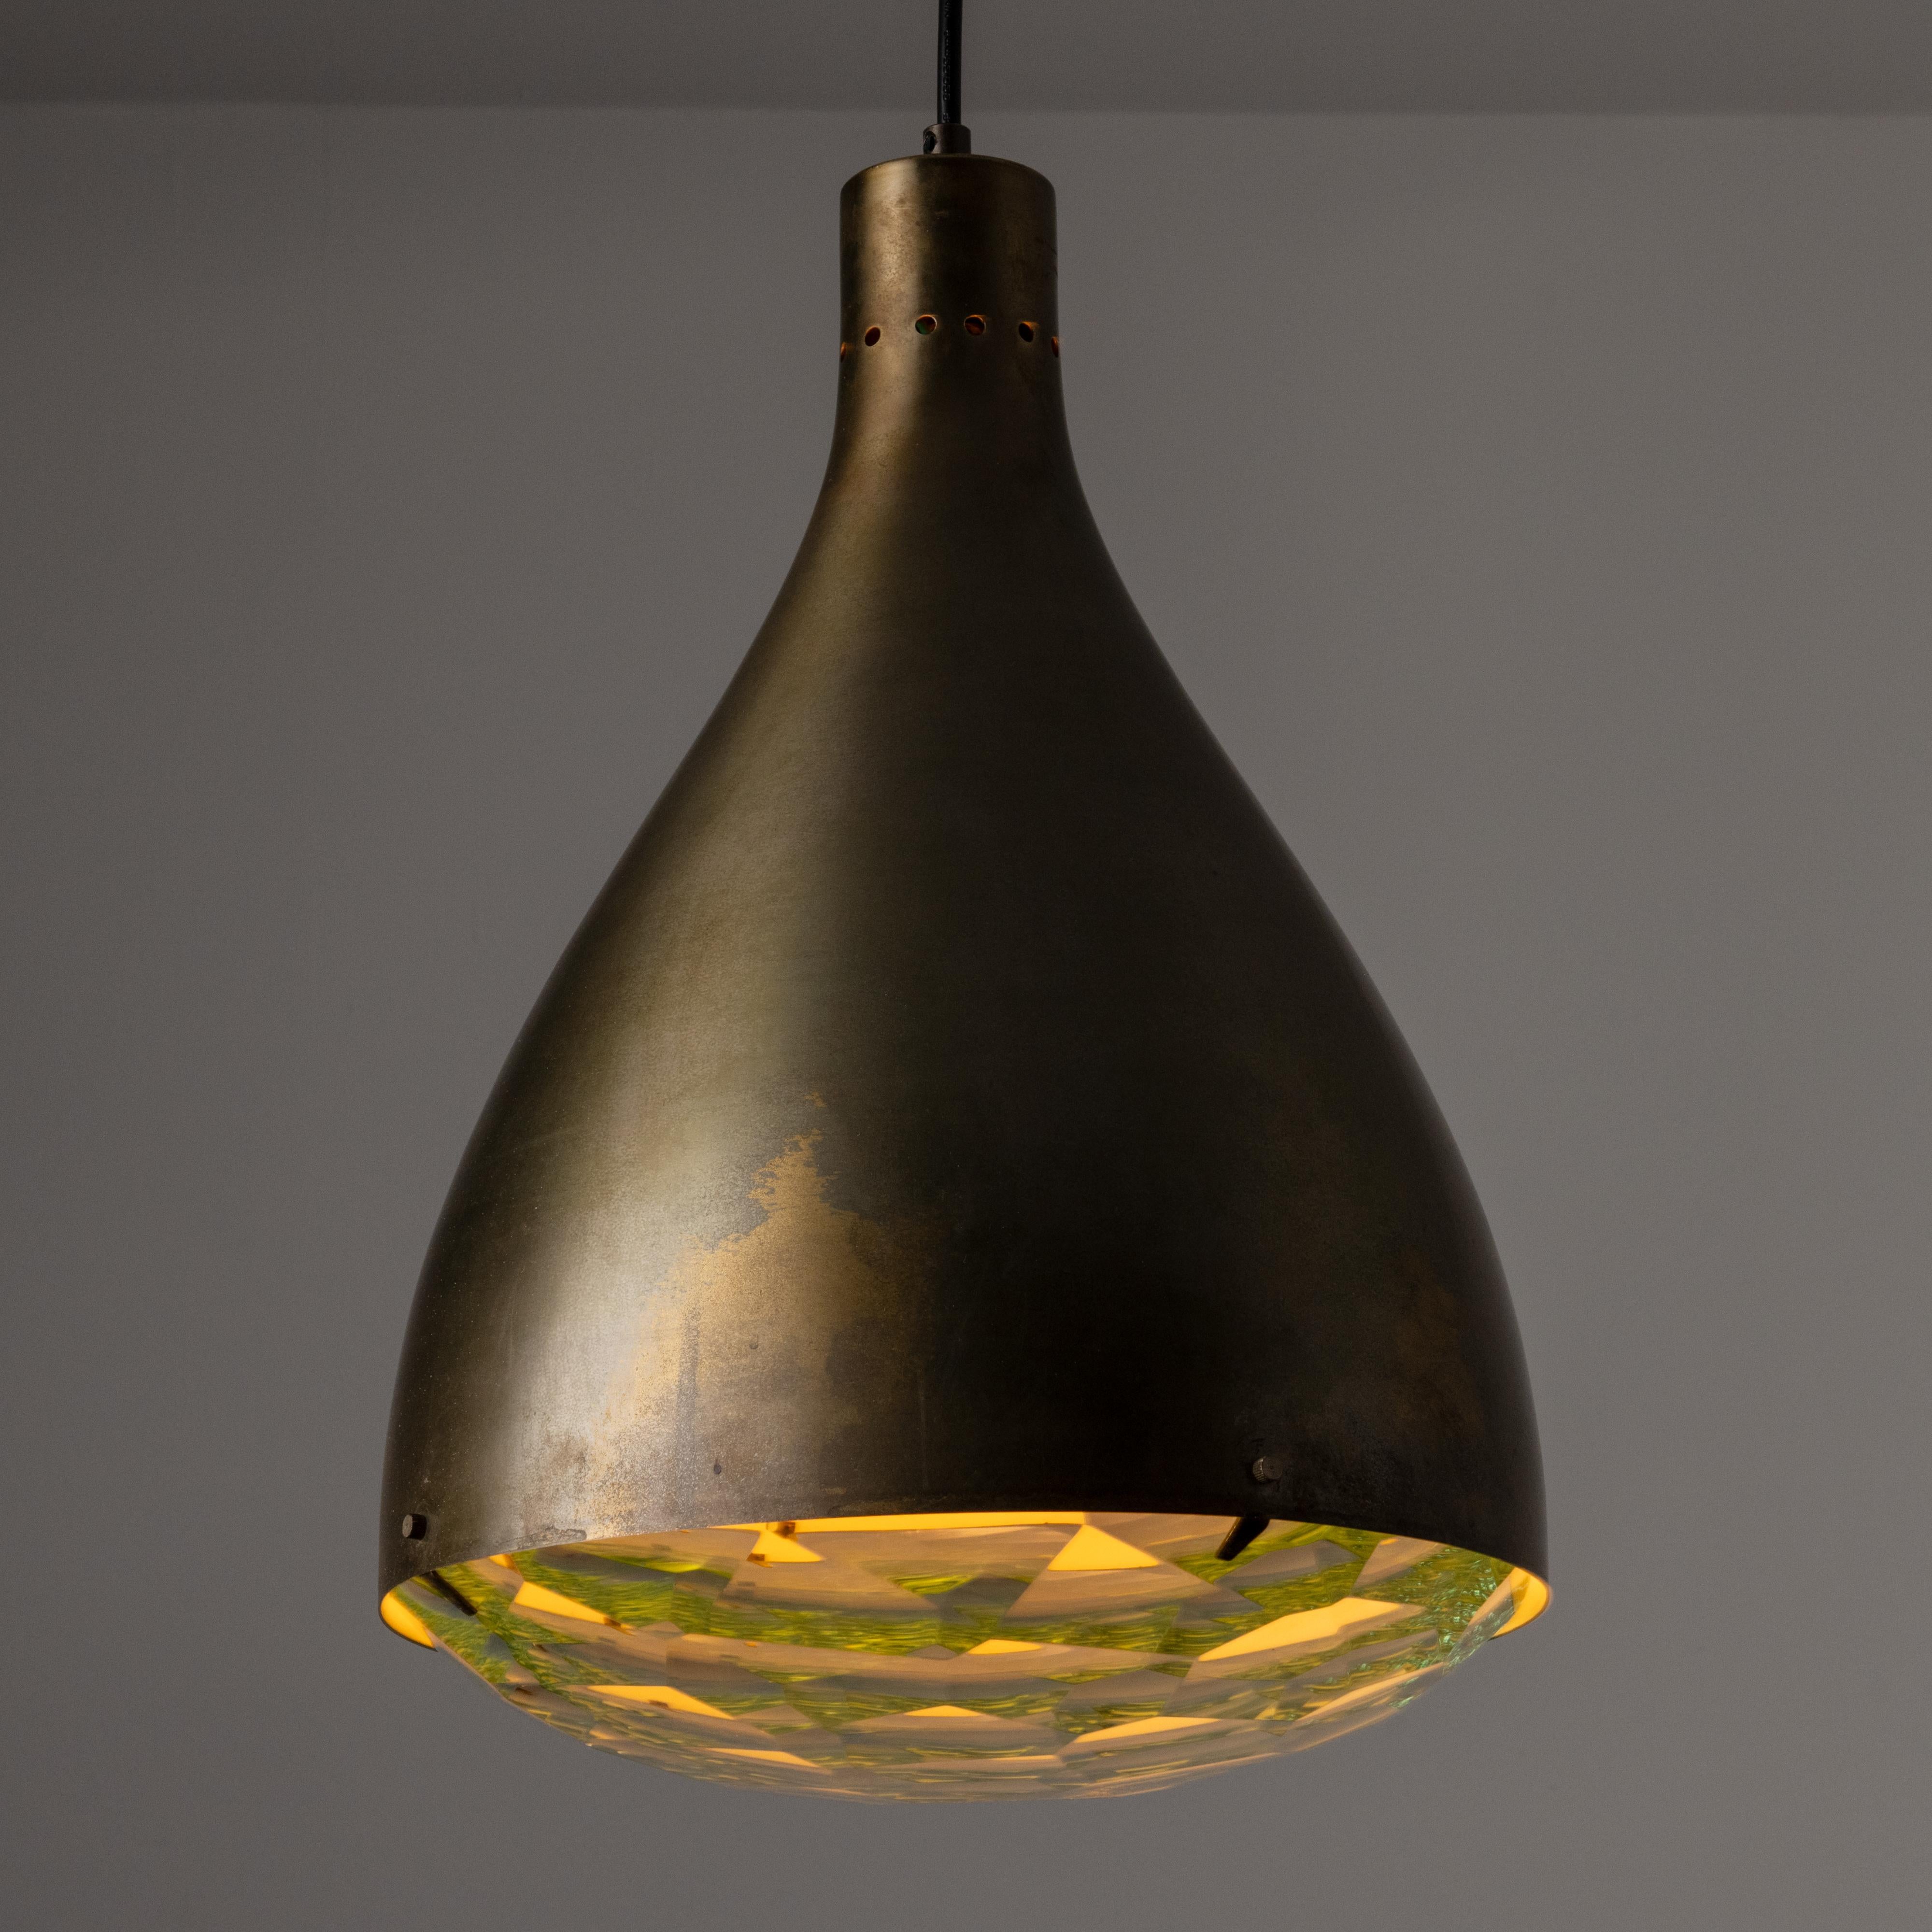 Model 2220 Ceiling Light by Max Ingrand for Fontana Arte. Designed and manufactured in Italy, circa the 1960s. A teardrop formed brass shade makes up the exterior portion of this simple but striking pendant. The bottom diffuser holds a geometric